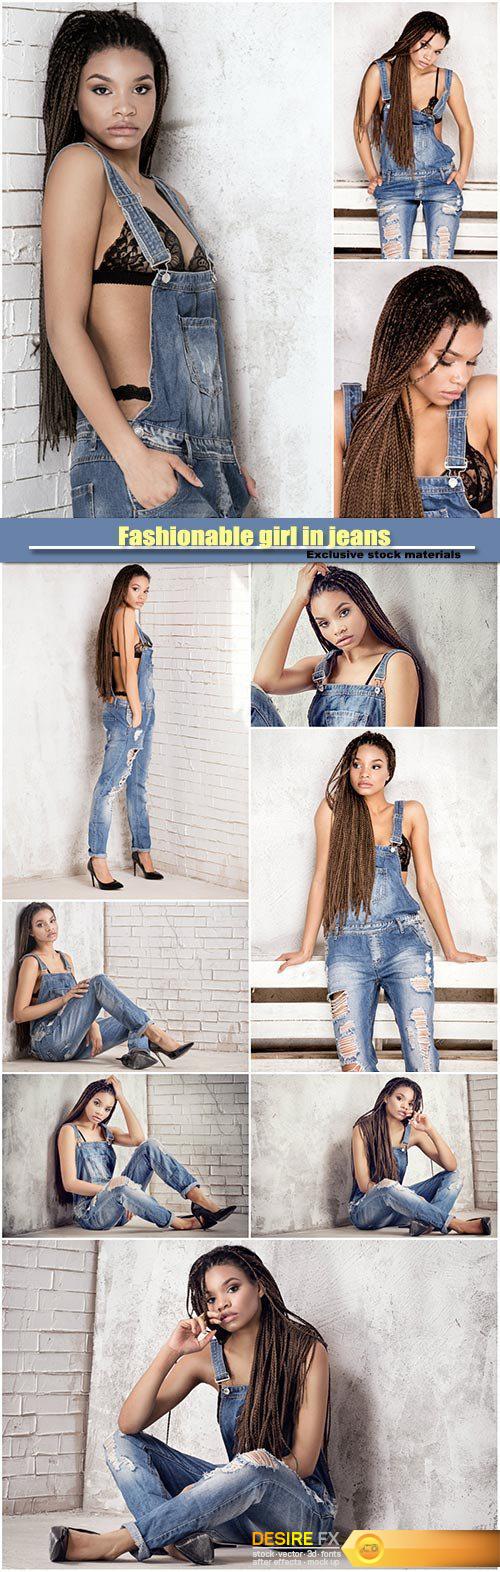 Fashionable girl in jeans